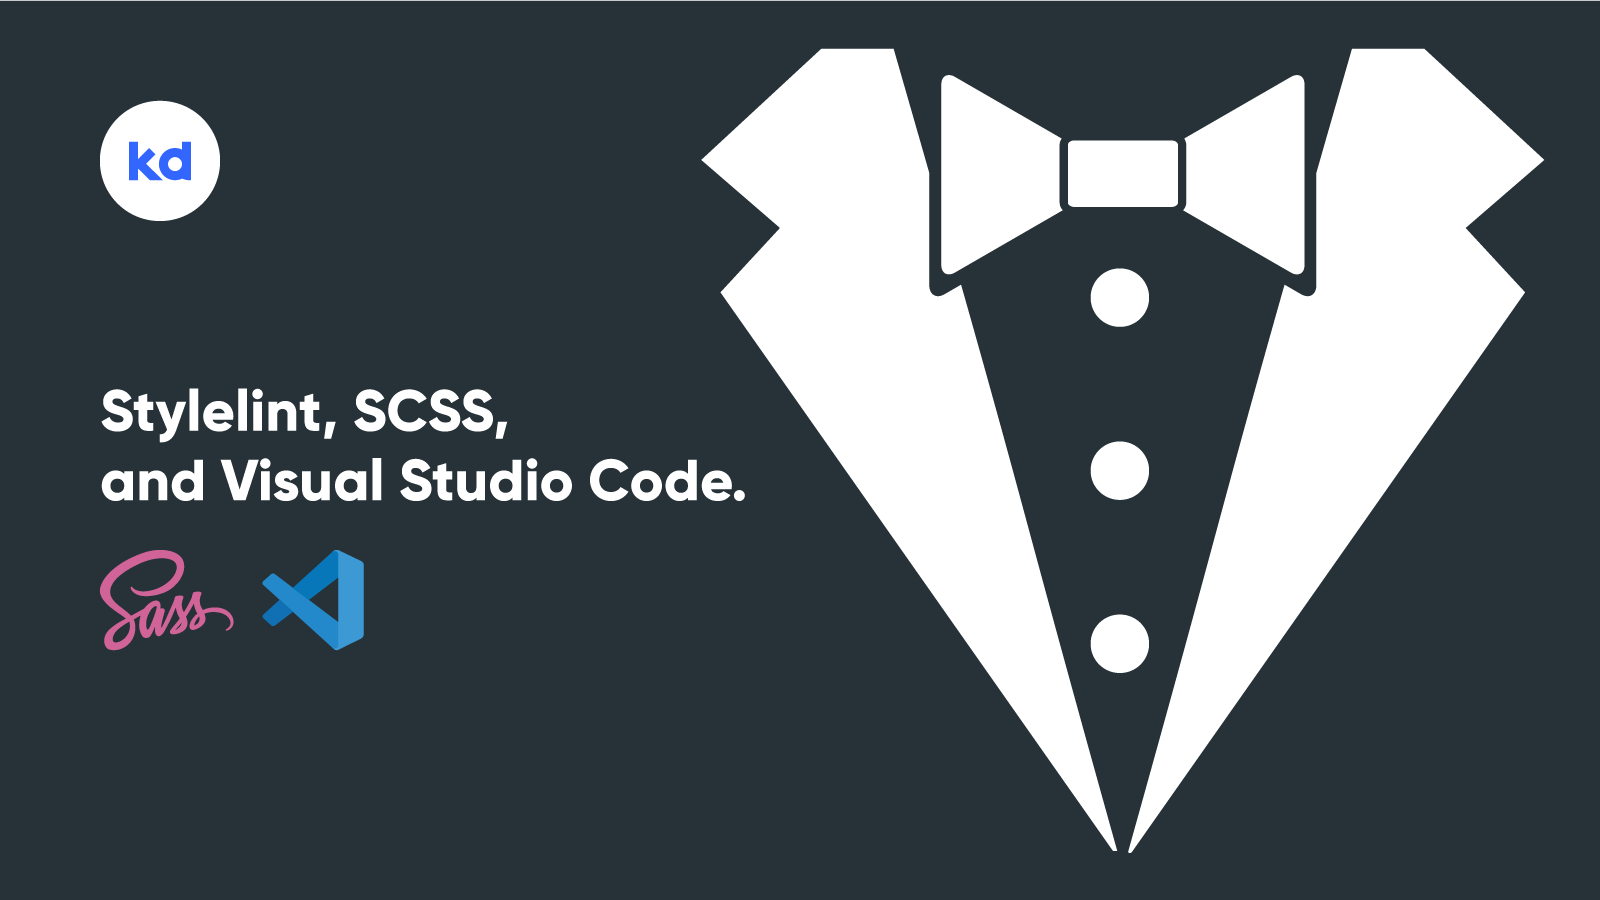 Stylelint, SCSS, and Visual Studio Code.